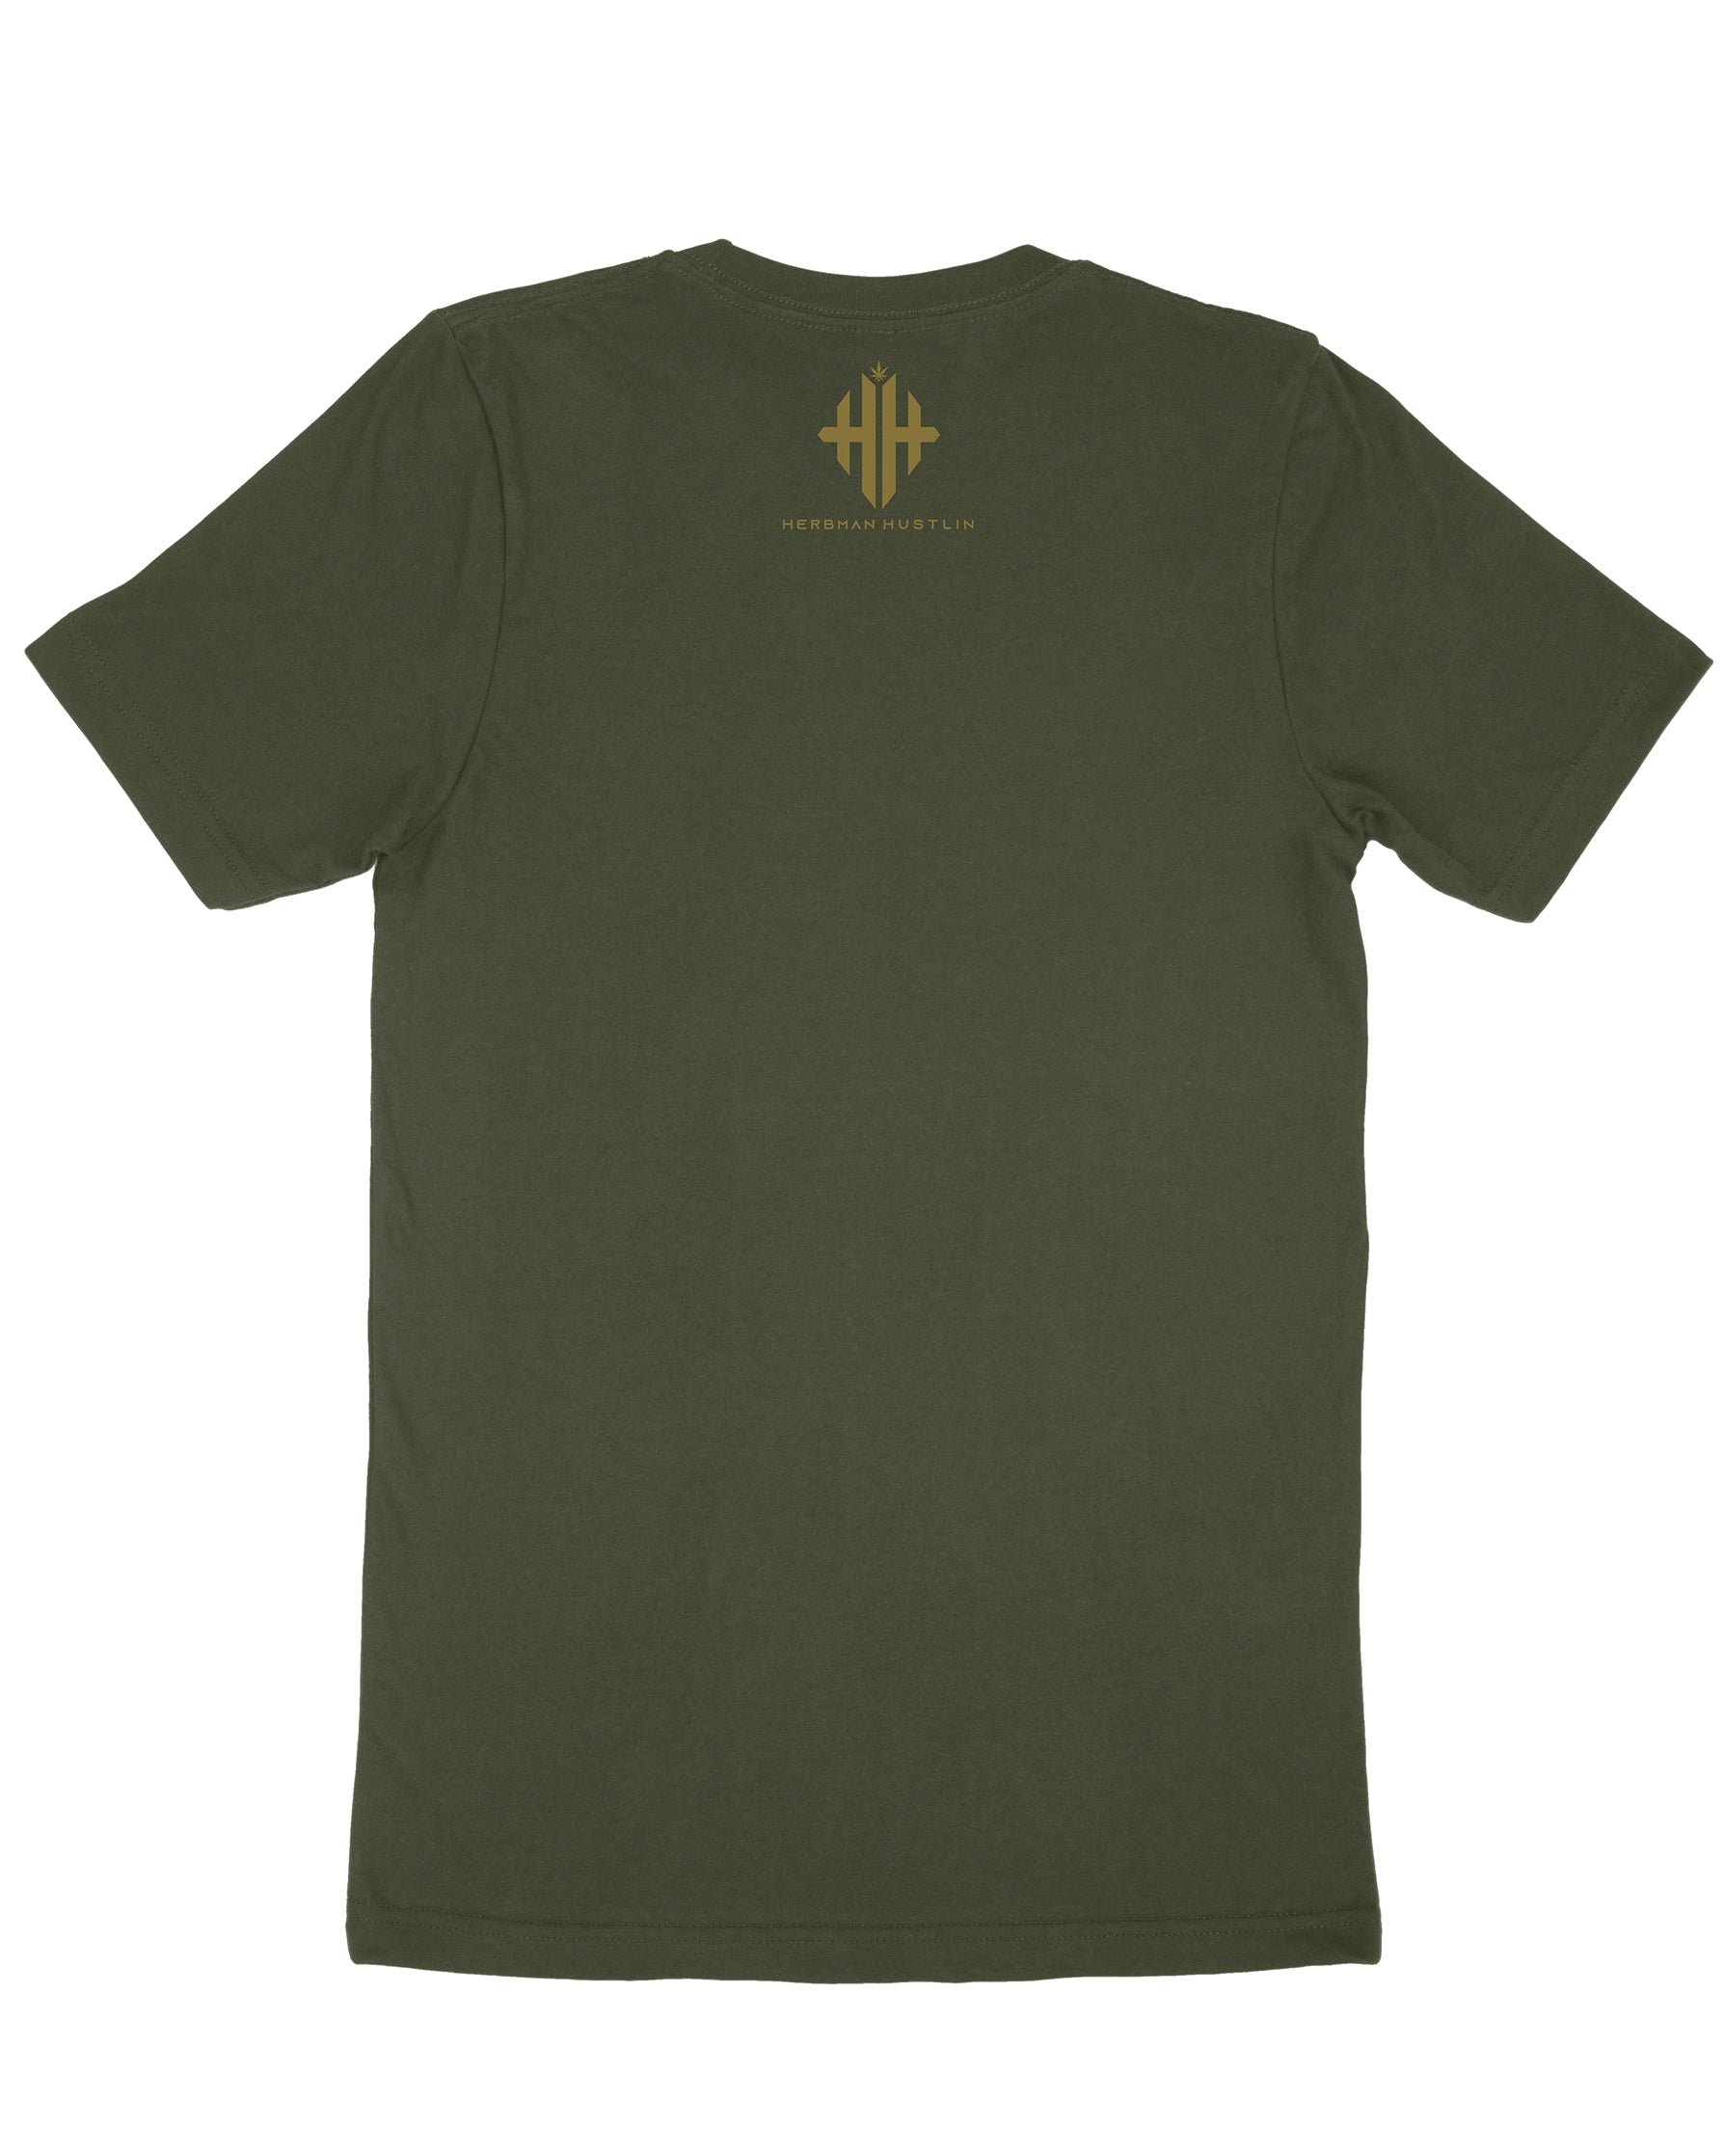 Herbman Hustlin 'It's a London Thing' LIMITED EDITION Tee - Green/Gold - Front